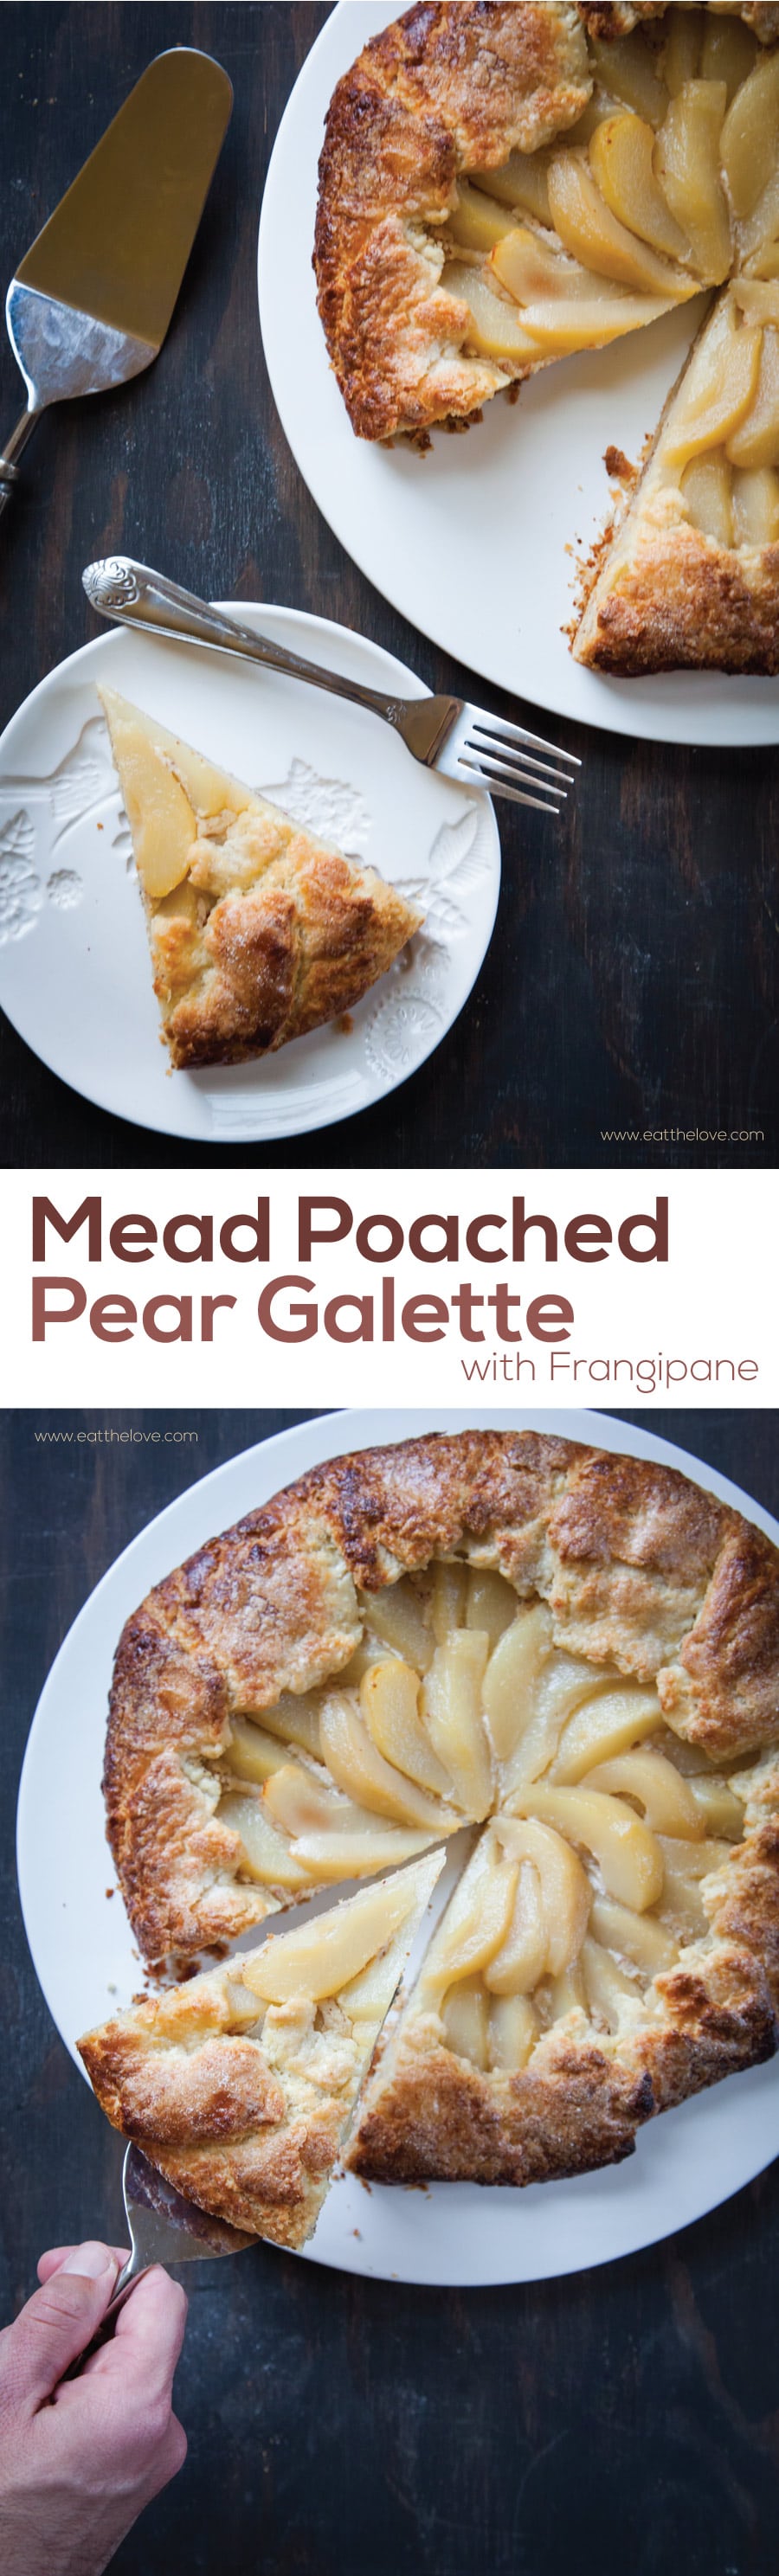 Mead Poached Pear Galette with Frangipane by Irvin Lin of Eat the Love